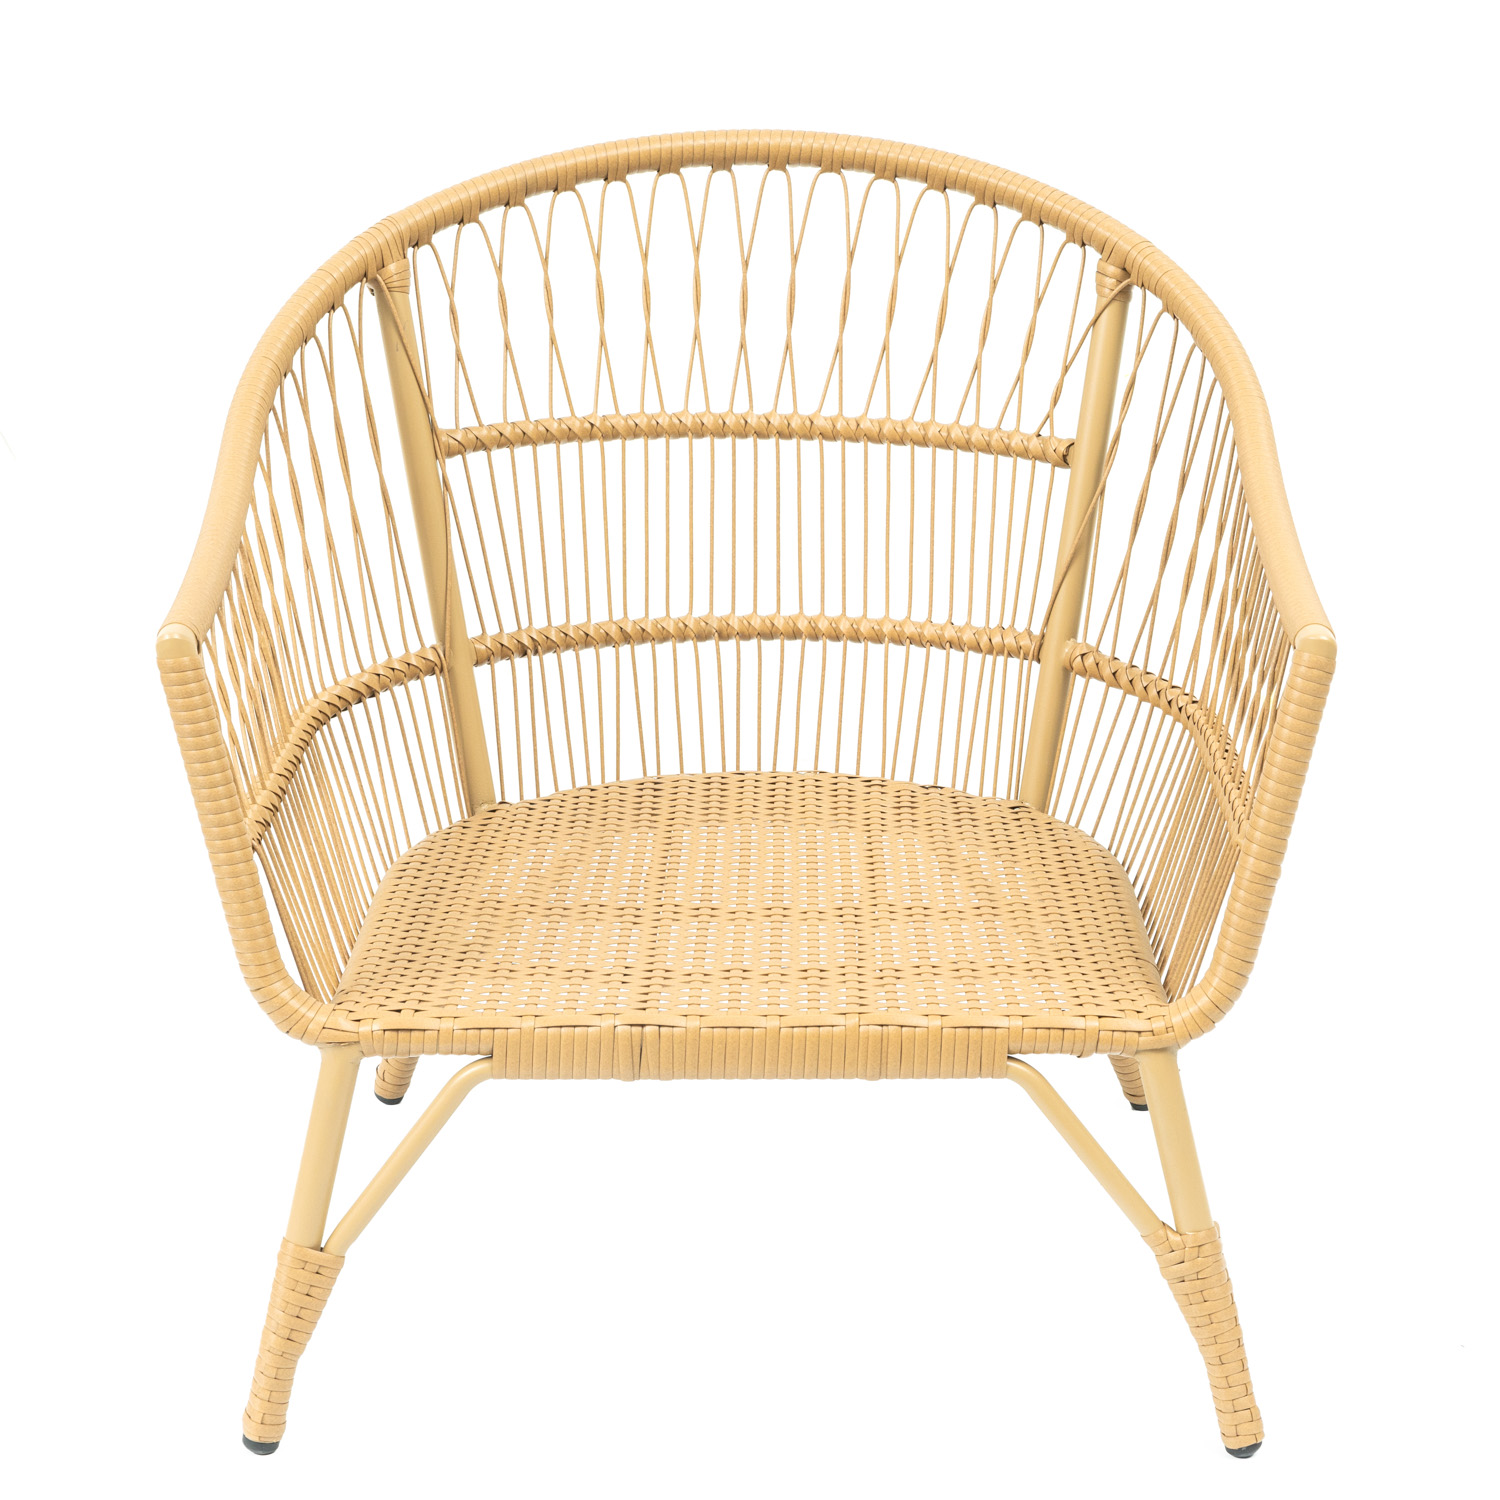 All Weather Wicker Outdoor Chairs Patio Chairs | Shinlin Garden Chair KF006